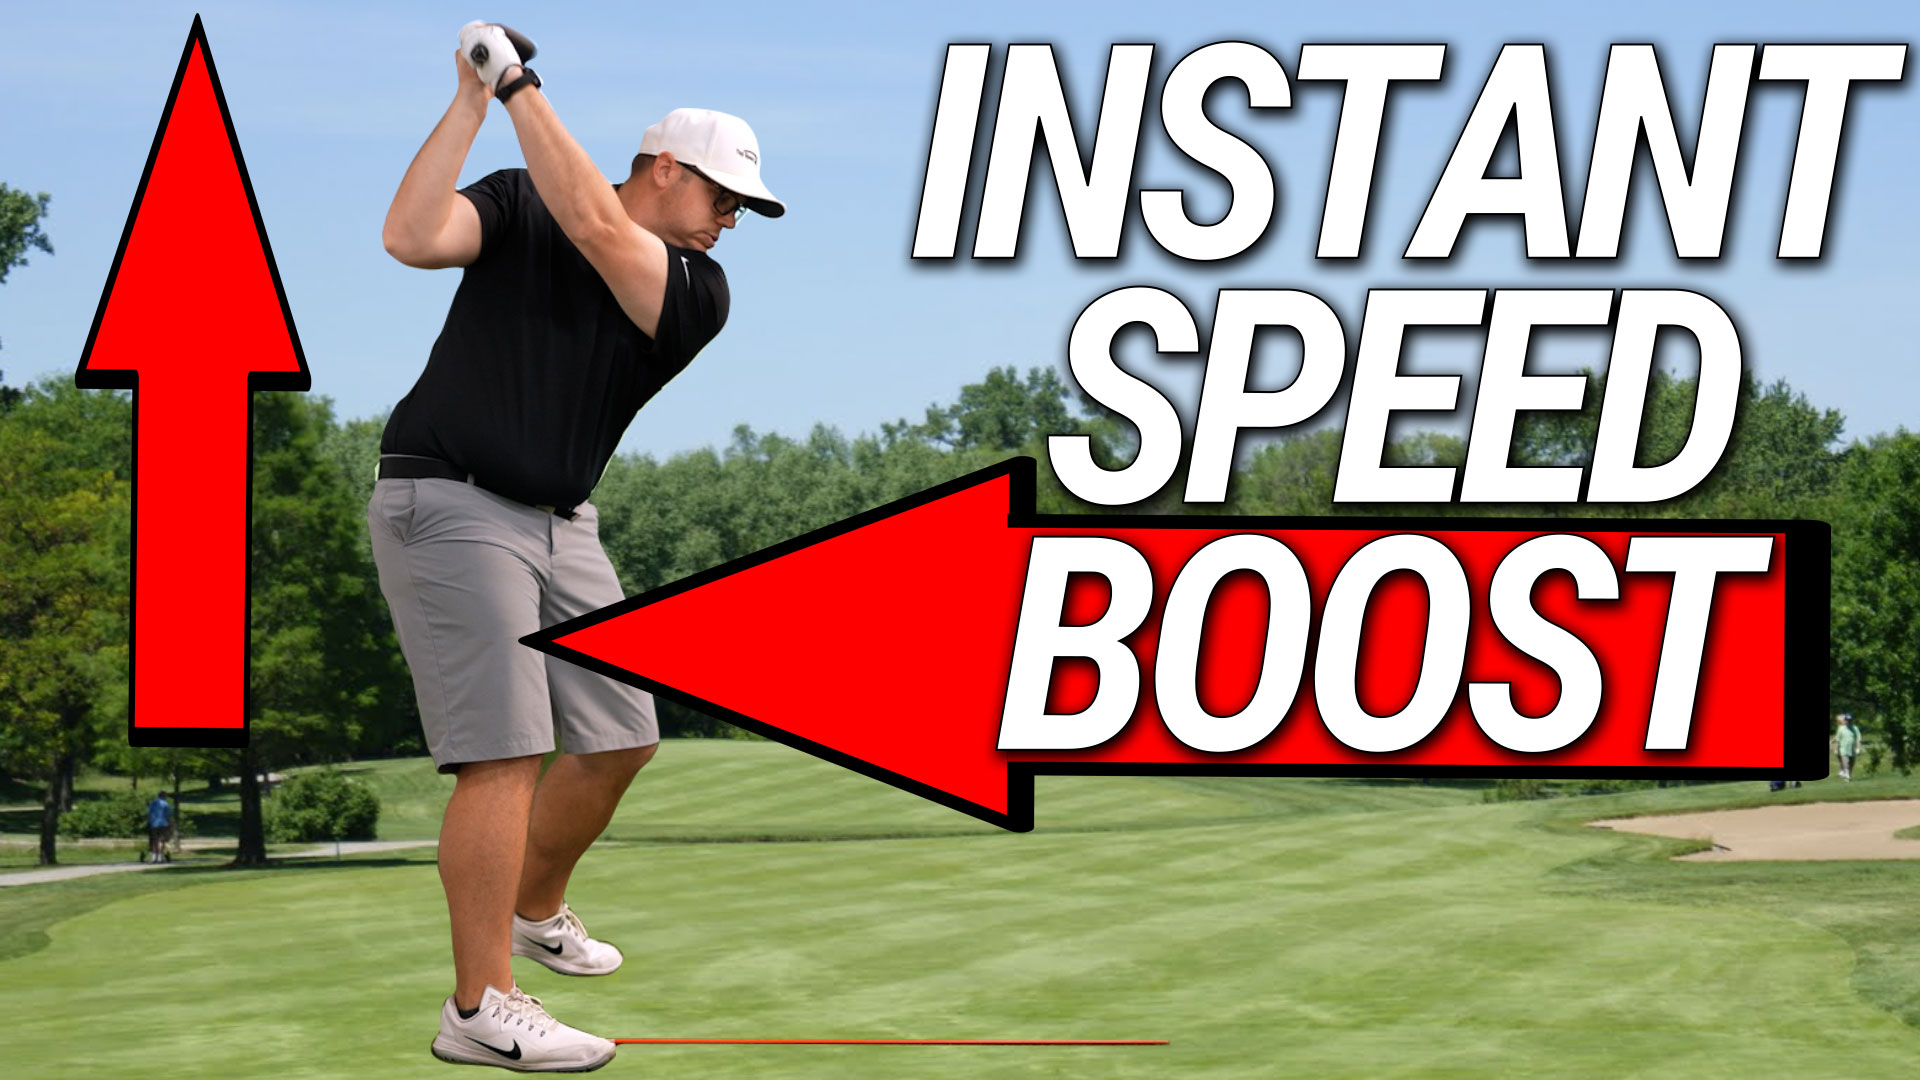 Simple Tips to Instantly Add Speed to Your Golf Swing • Top Speed Golf